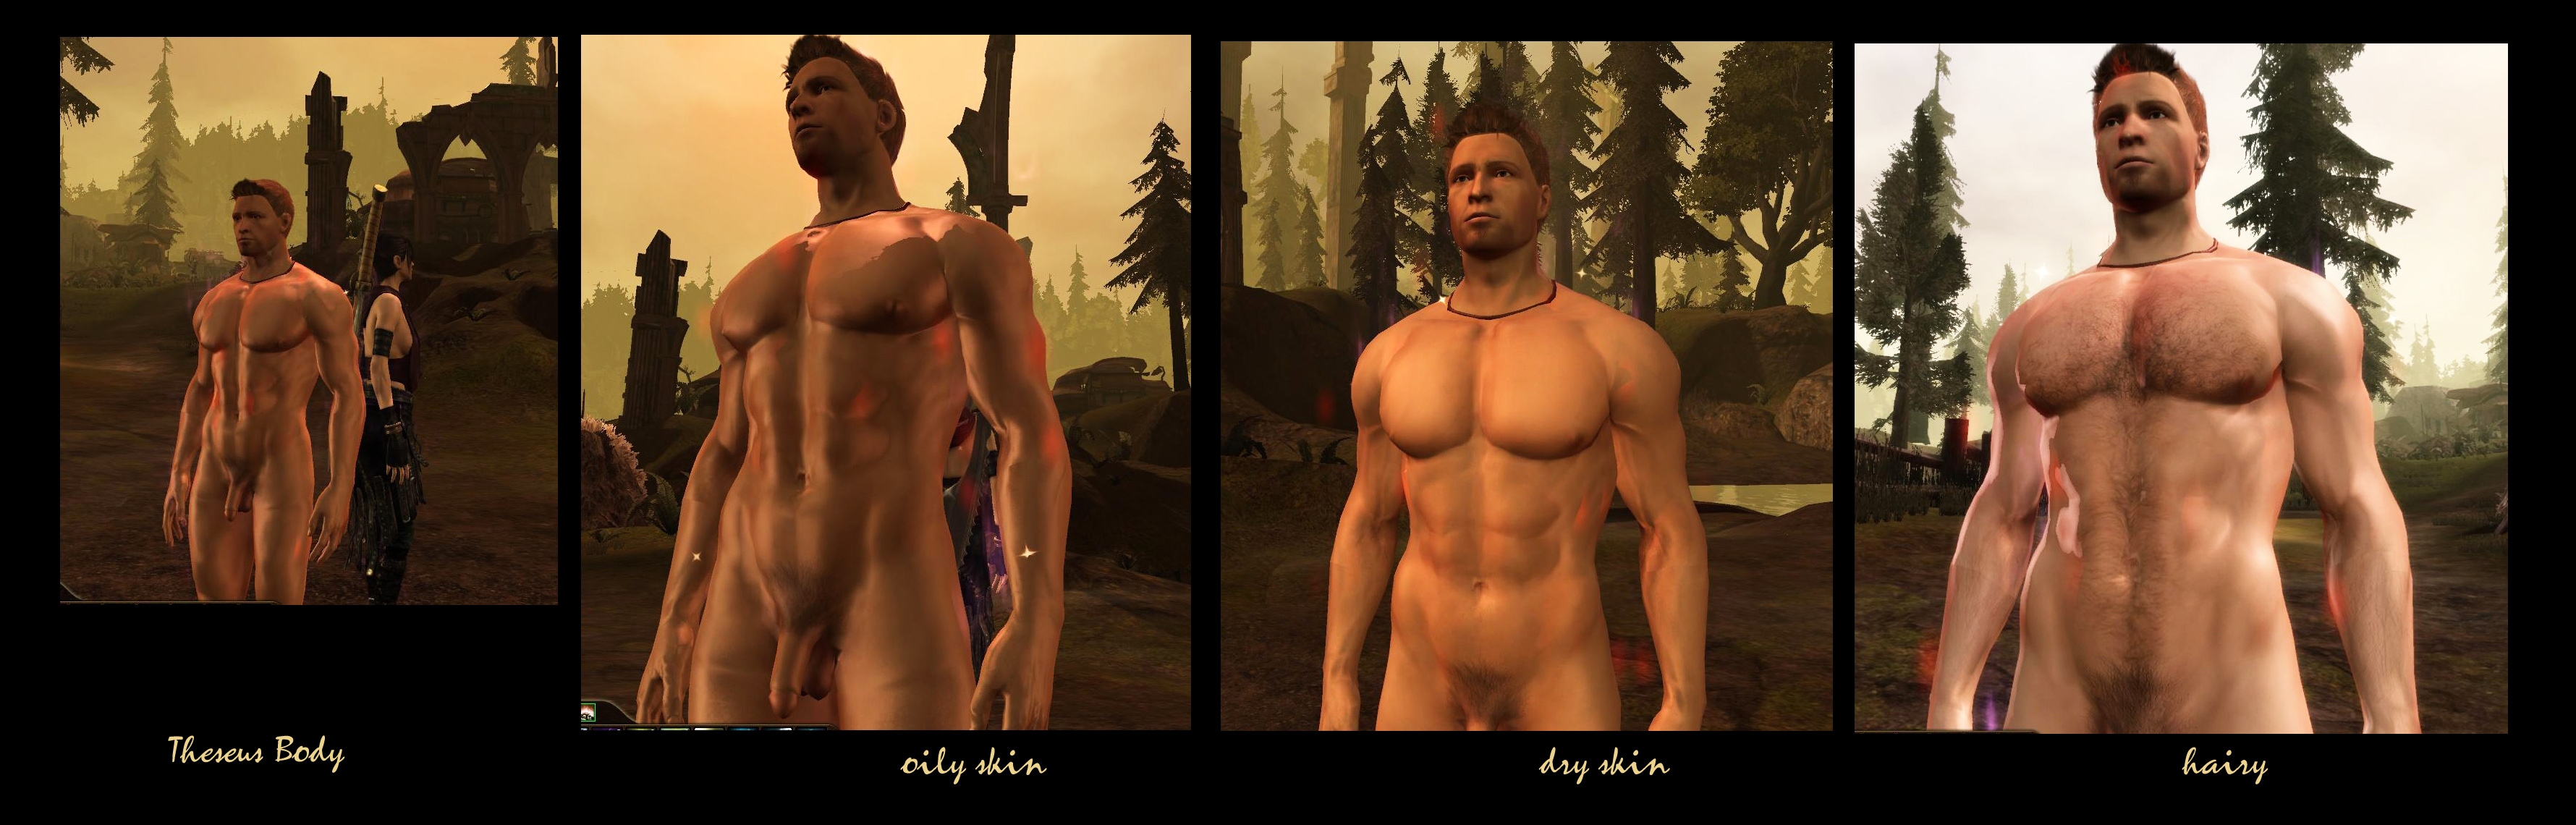 ari arias recommends dragon age inquisition nude mods pic